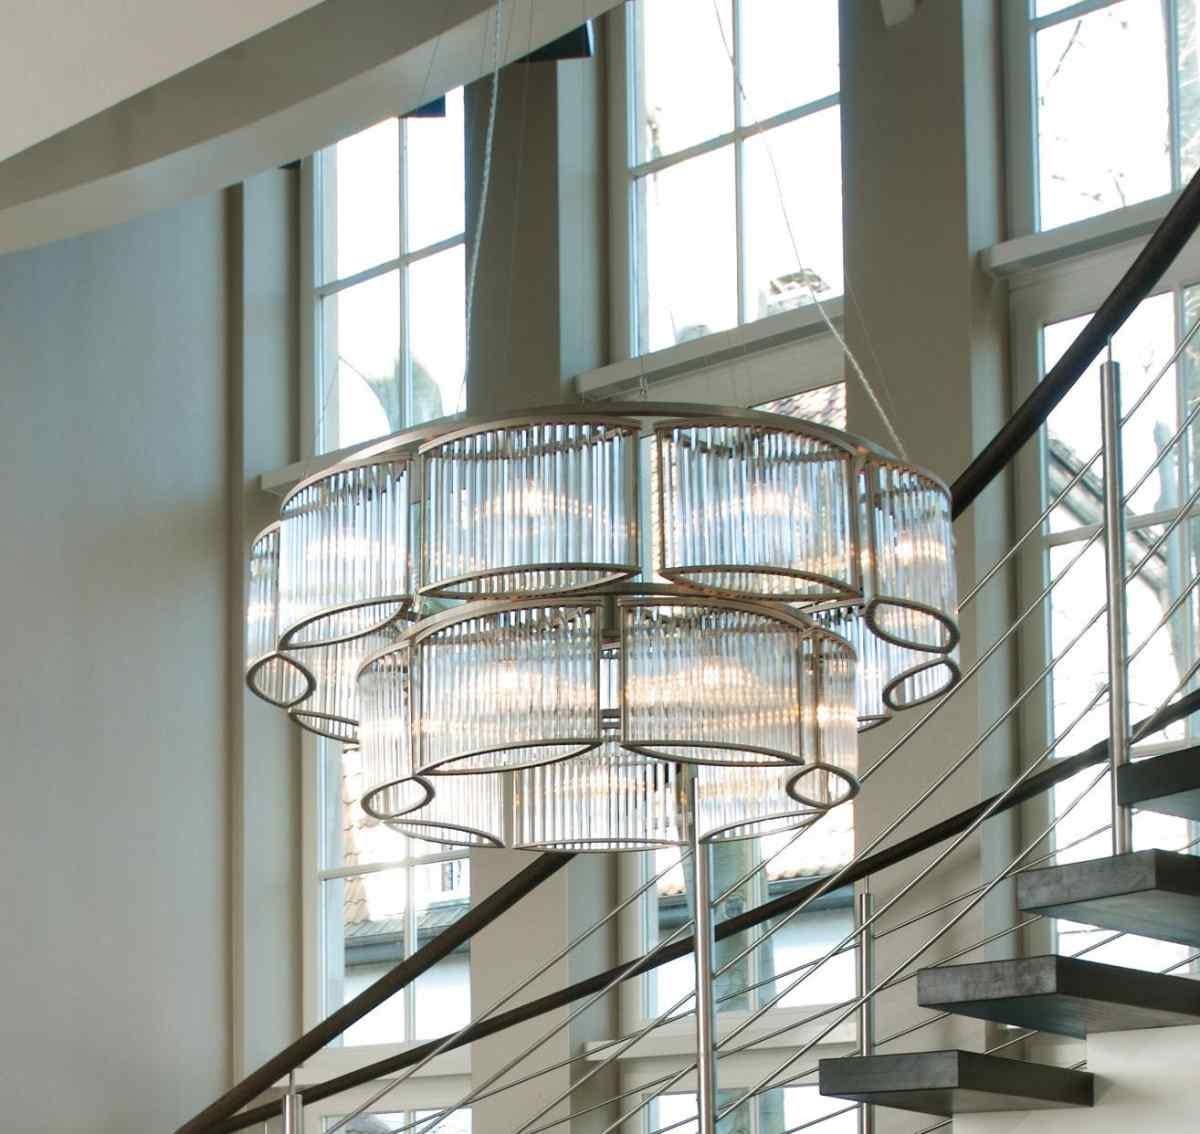 Large Stilio 9/6 two tier pendant chandelier from German manufacturer Licht Im Raum. The chandelier is made up of high quality glass rods placed in oval formed frames of nickel plates steel frames, attached to circular steel ring on each